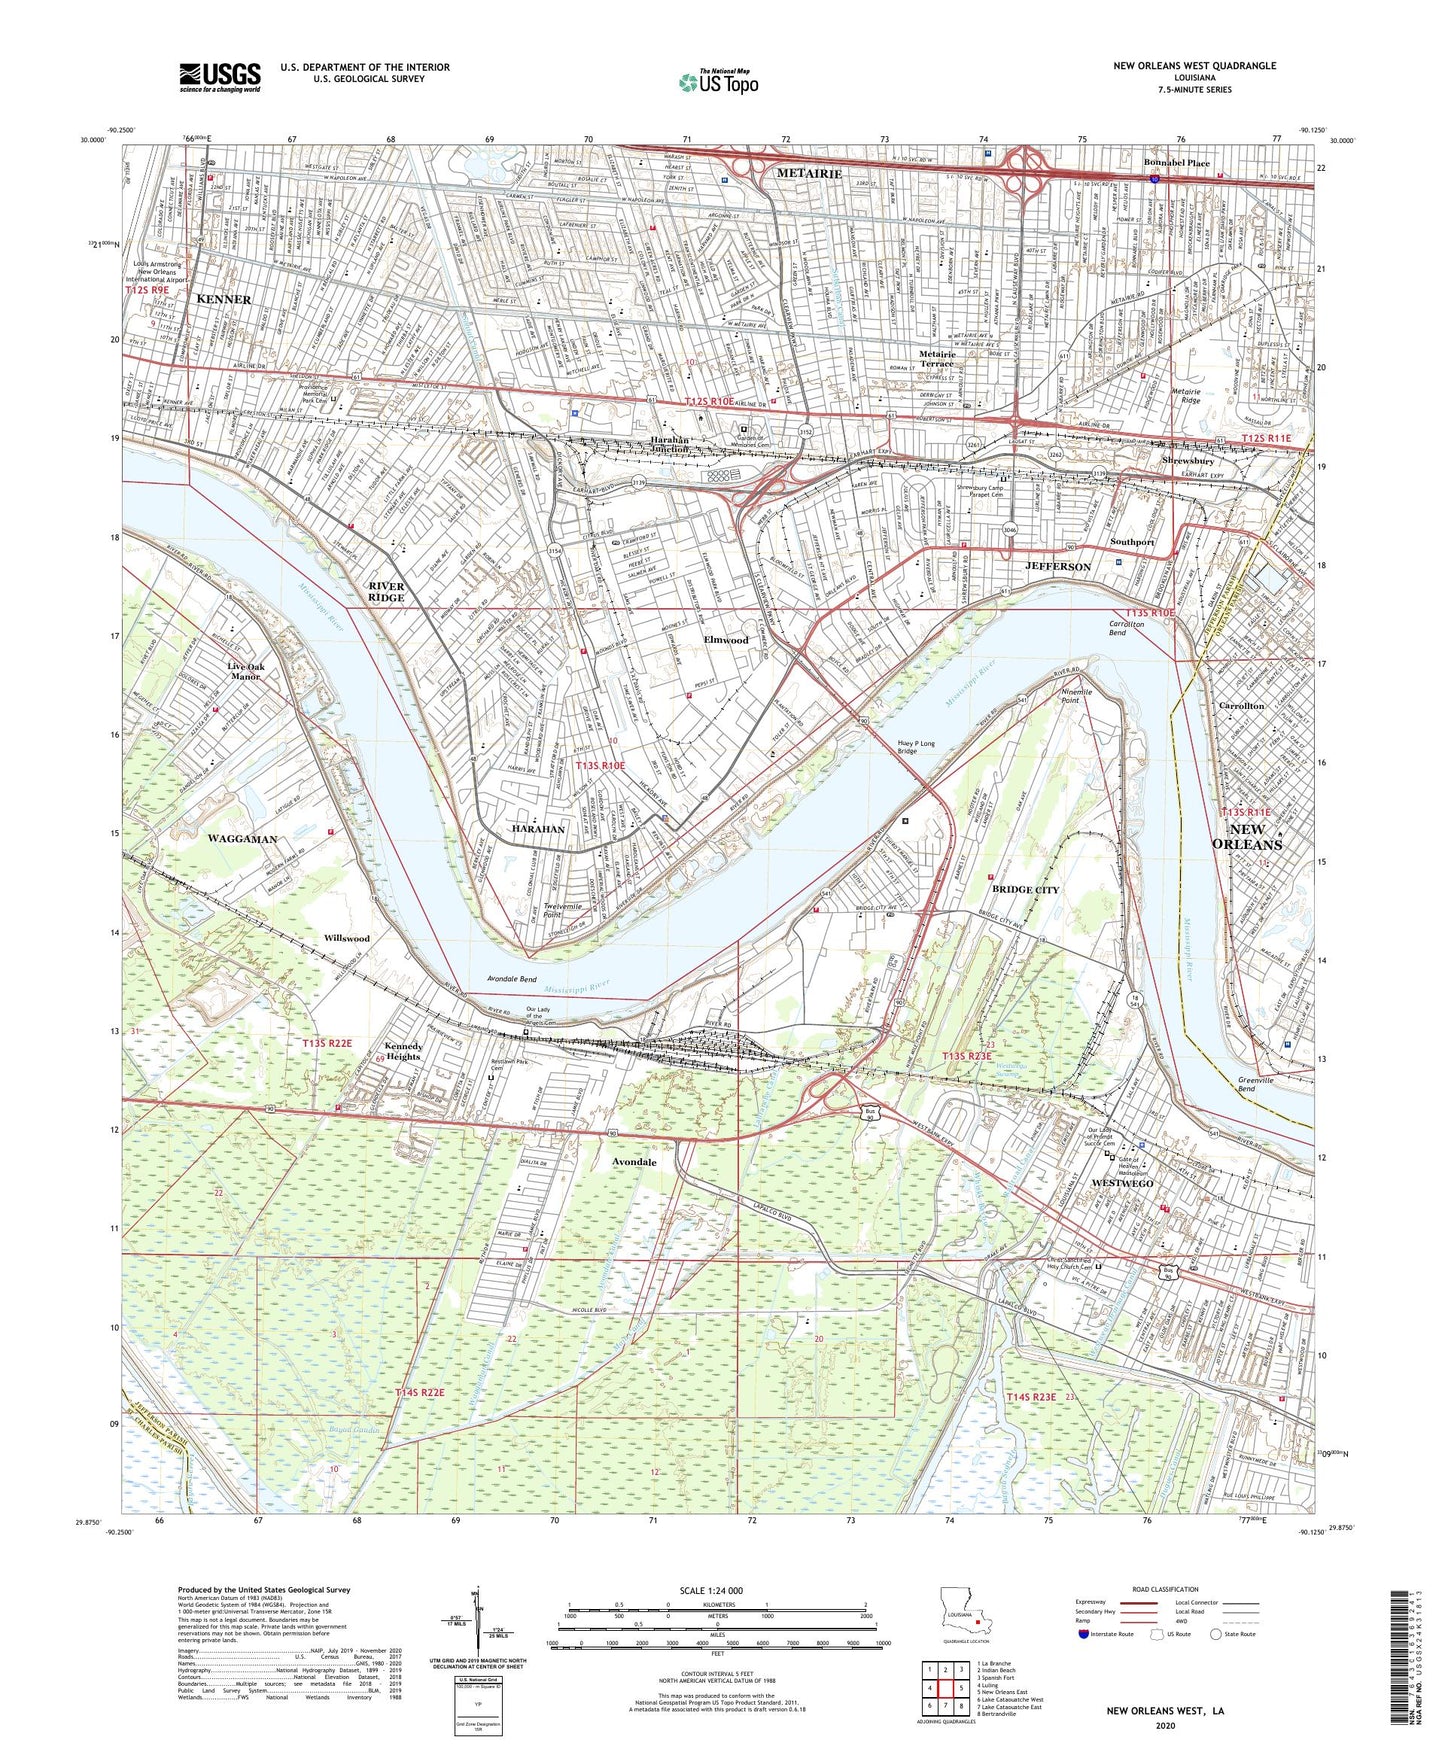 New Orleans West Louisiana US Topo Map Image